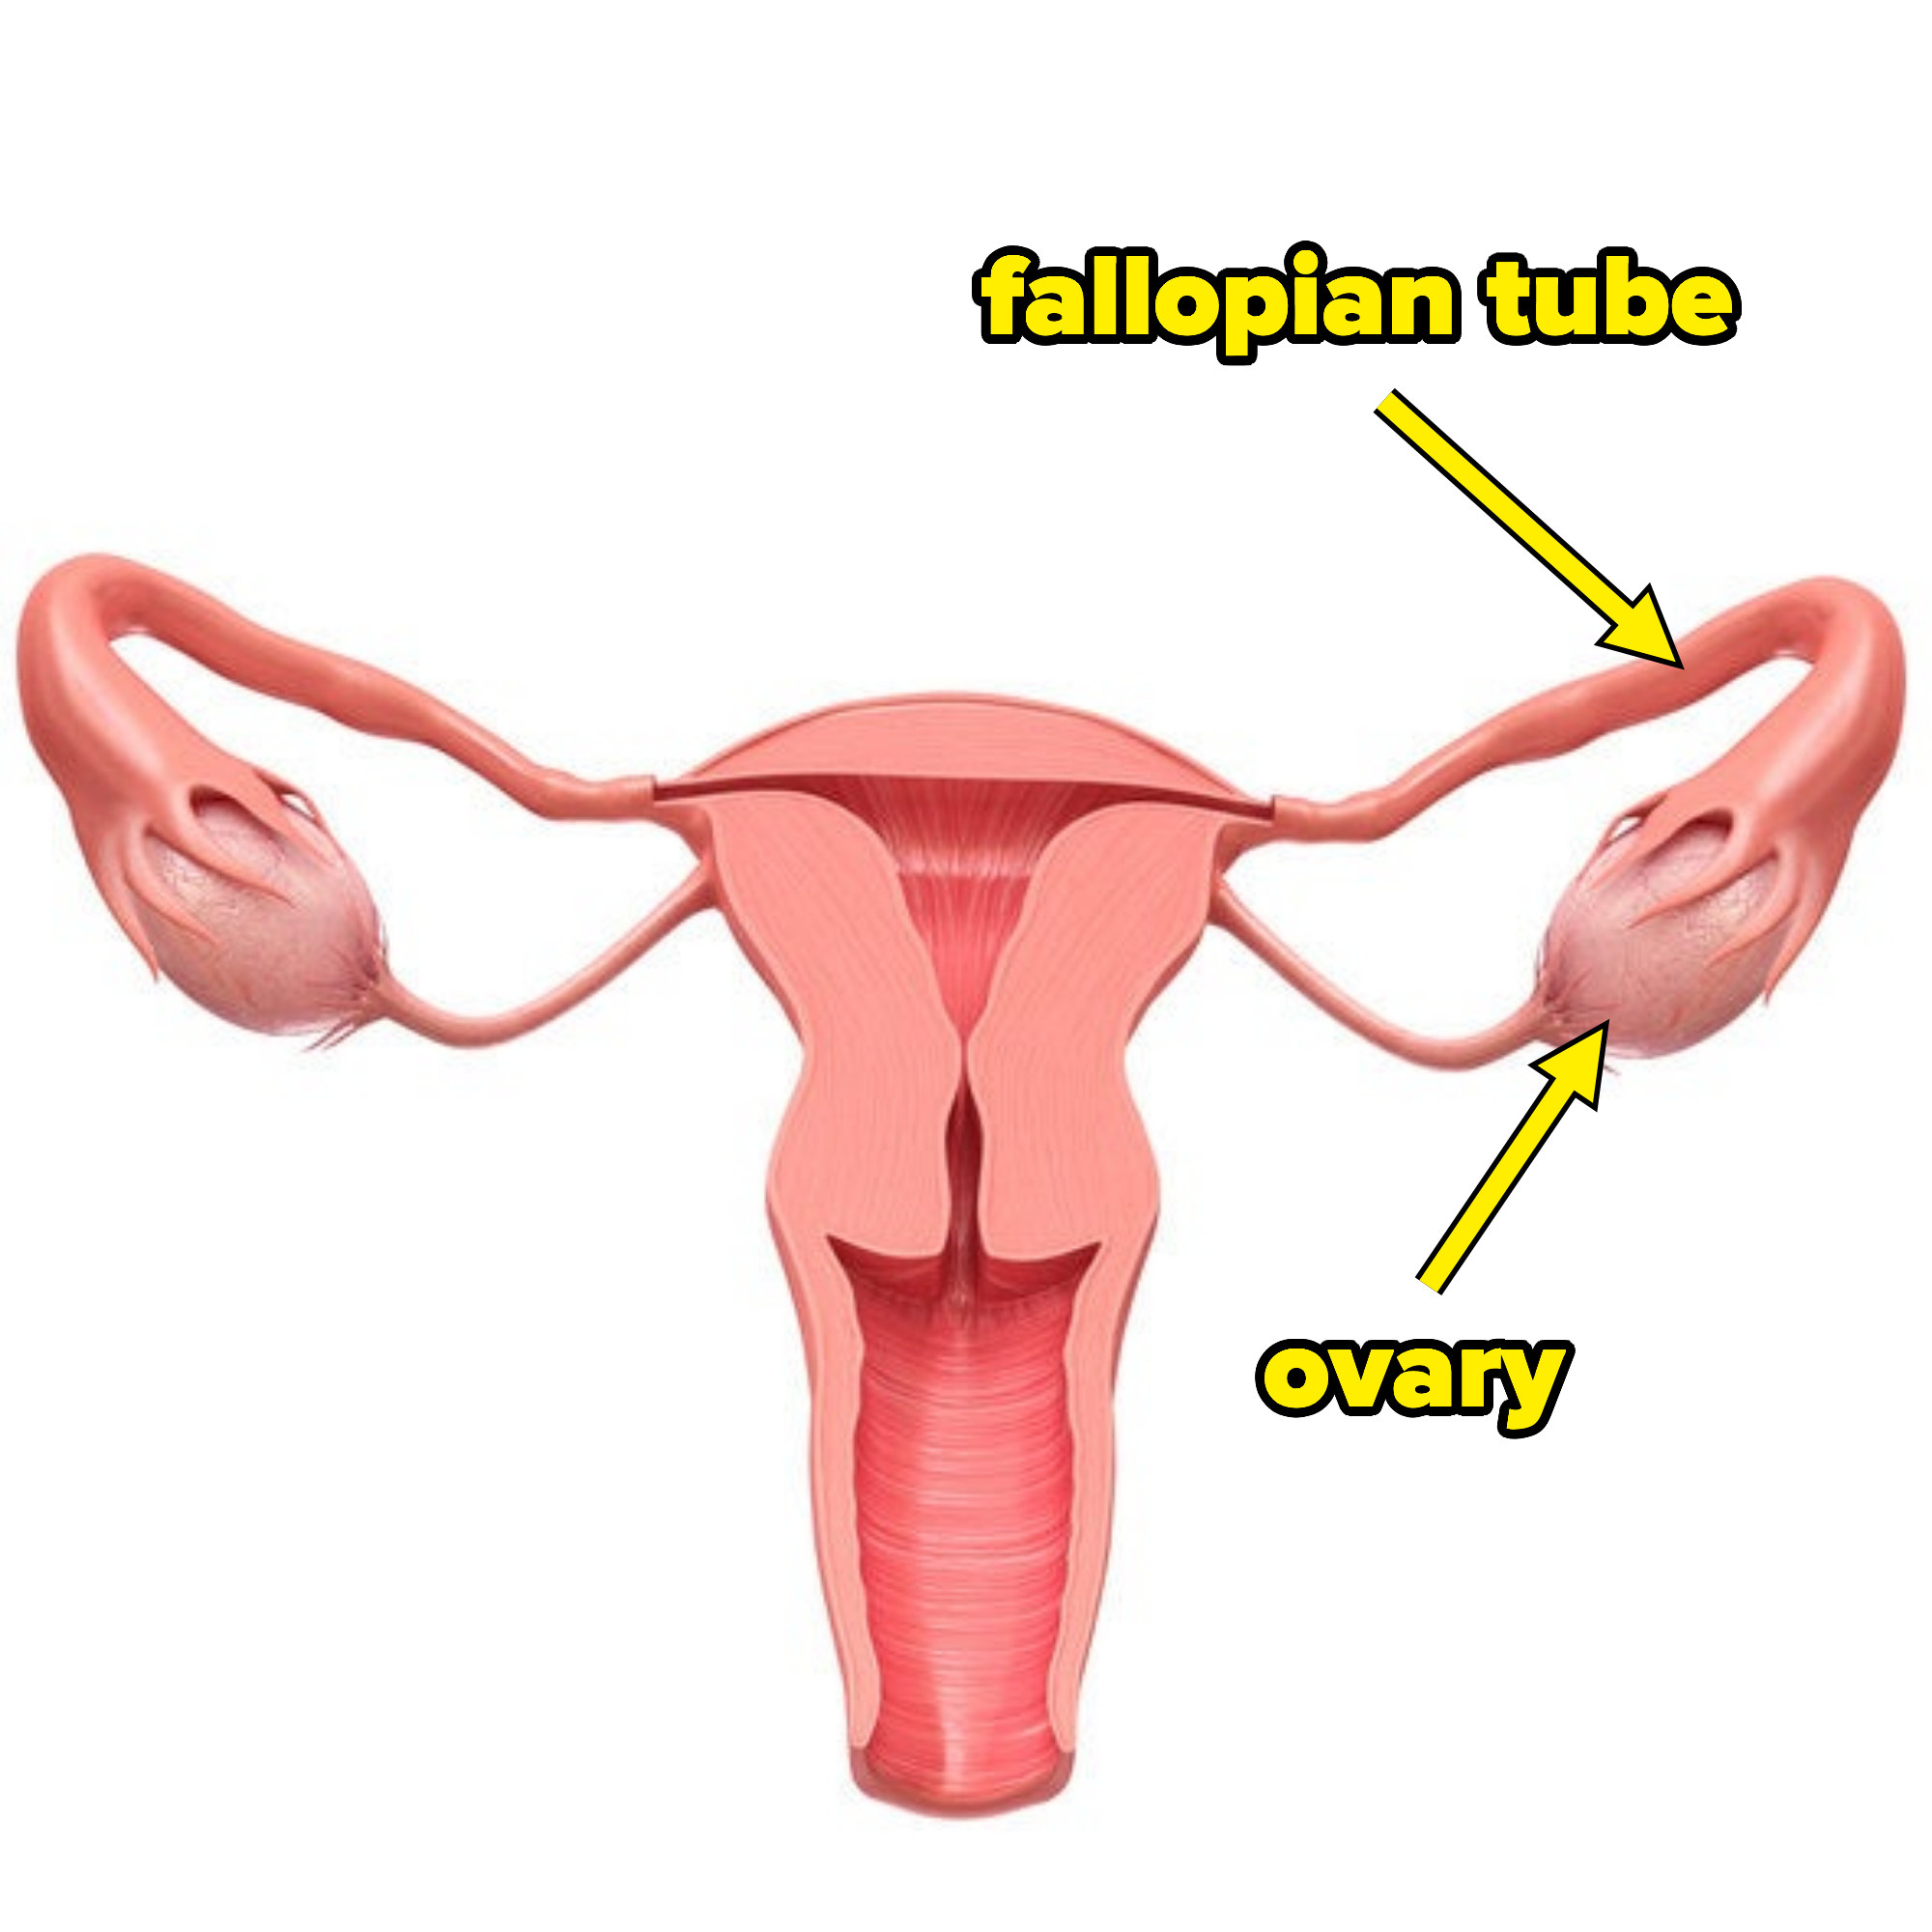 An illustration of the ovaries